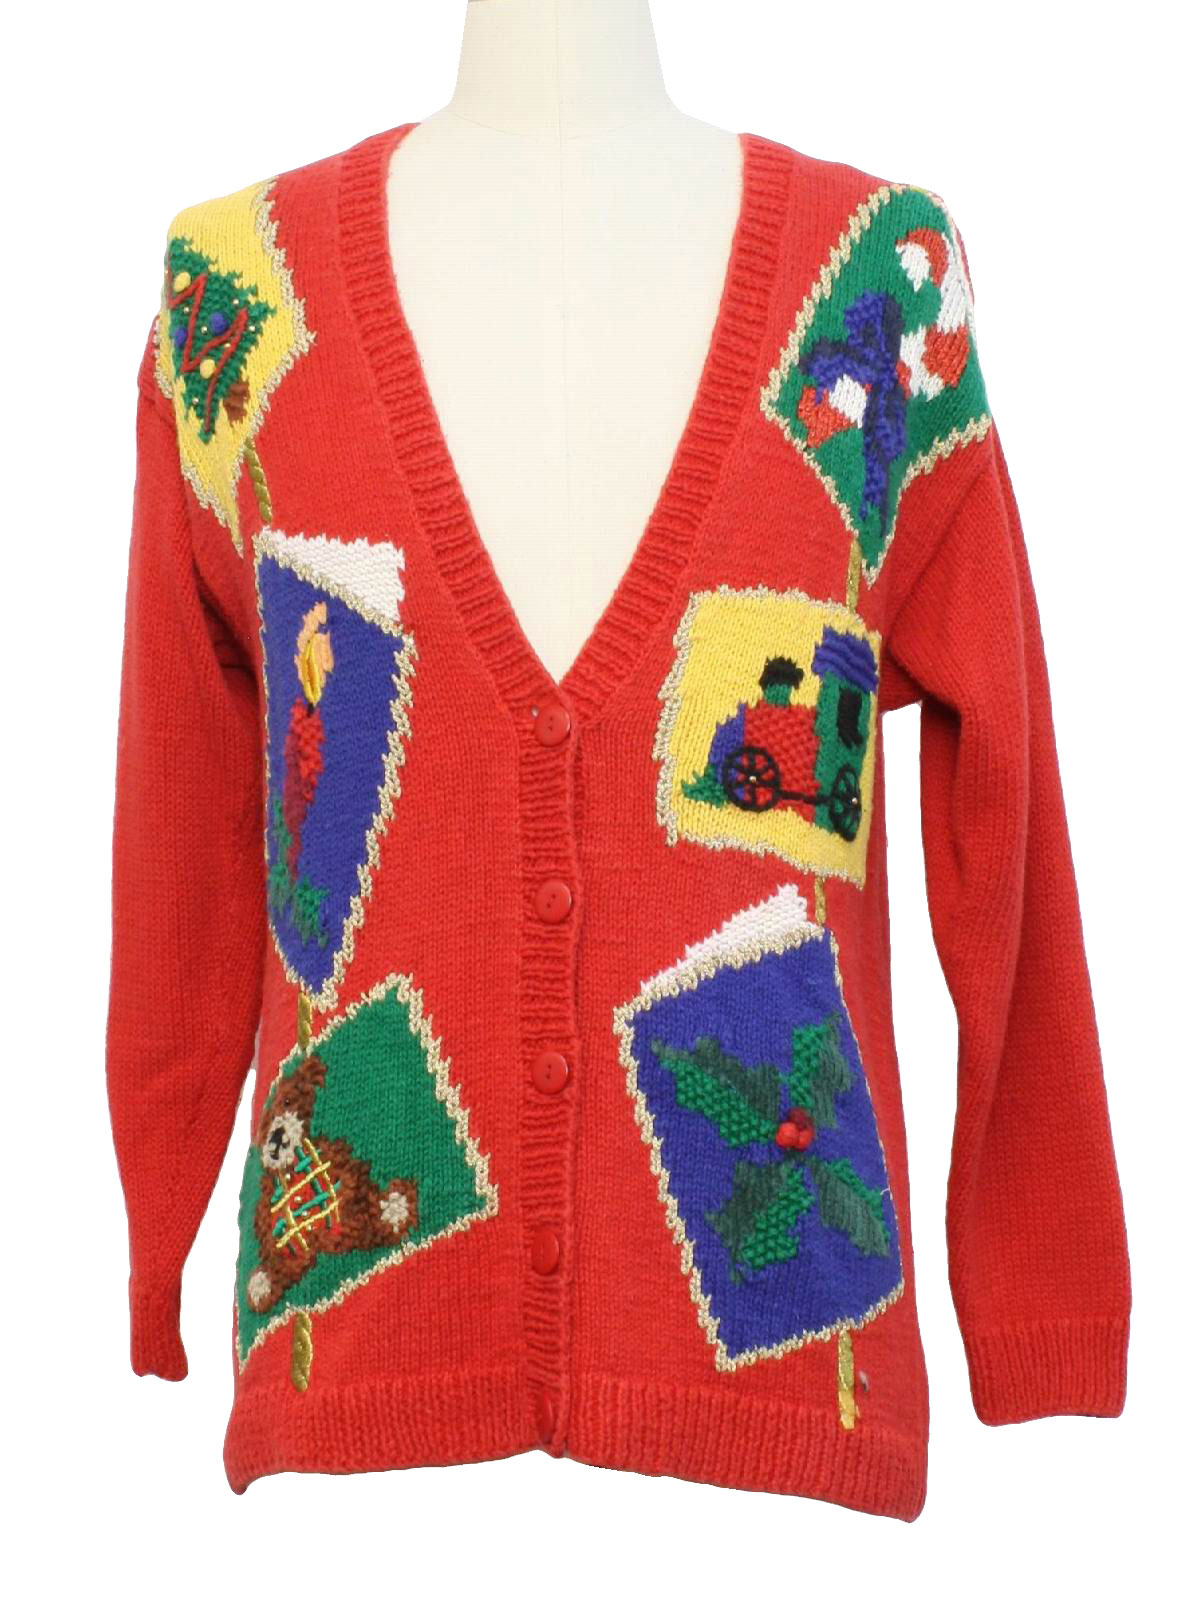 Womens Ugly Christmas Sweater: -Talbots- Womens red background cotton ...